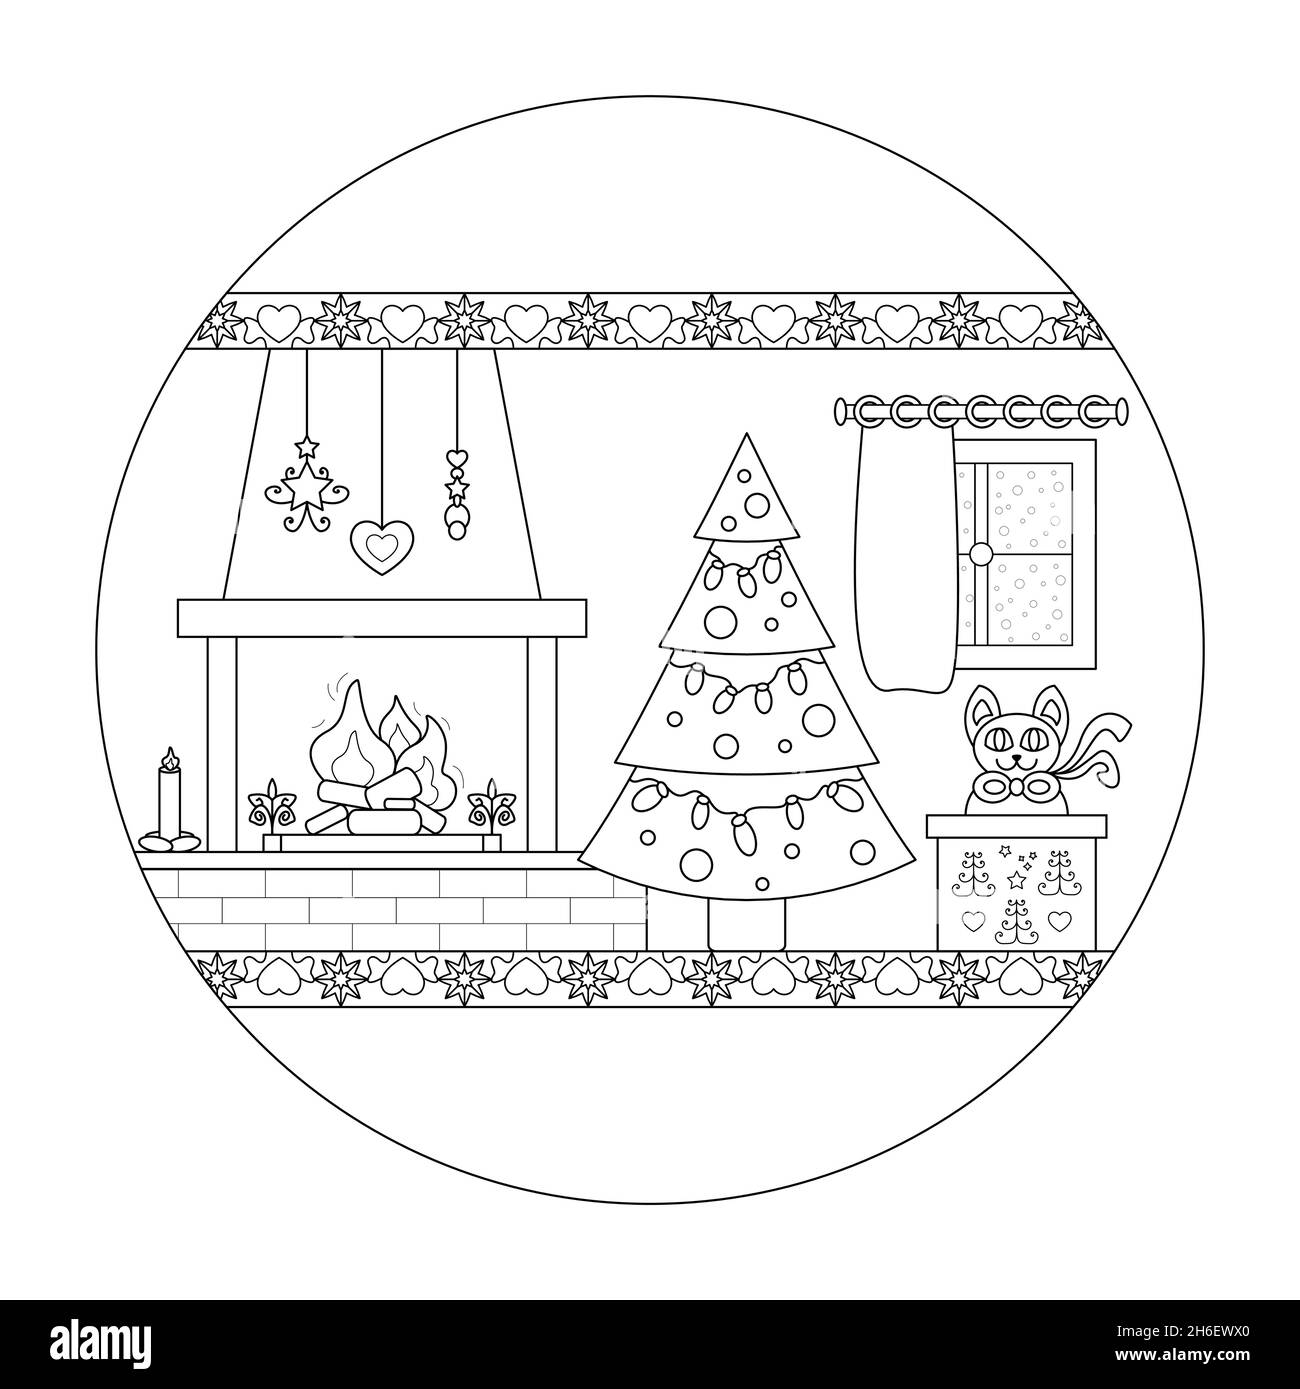 Wood fire chimney, Christmas tree and cat coming out of a gift box . Comforting atmosphere. Christmas mandala. Vector illustration. Stock Vector